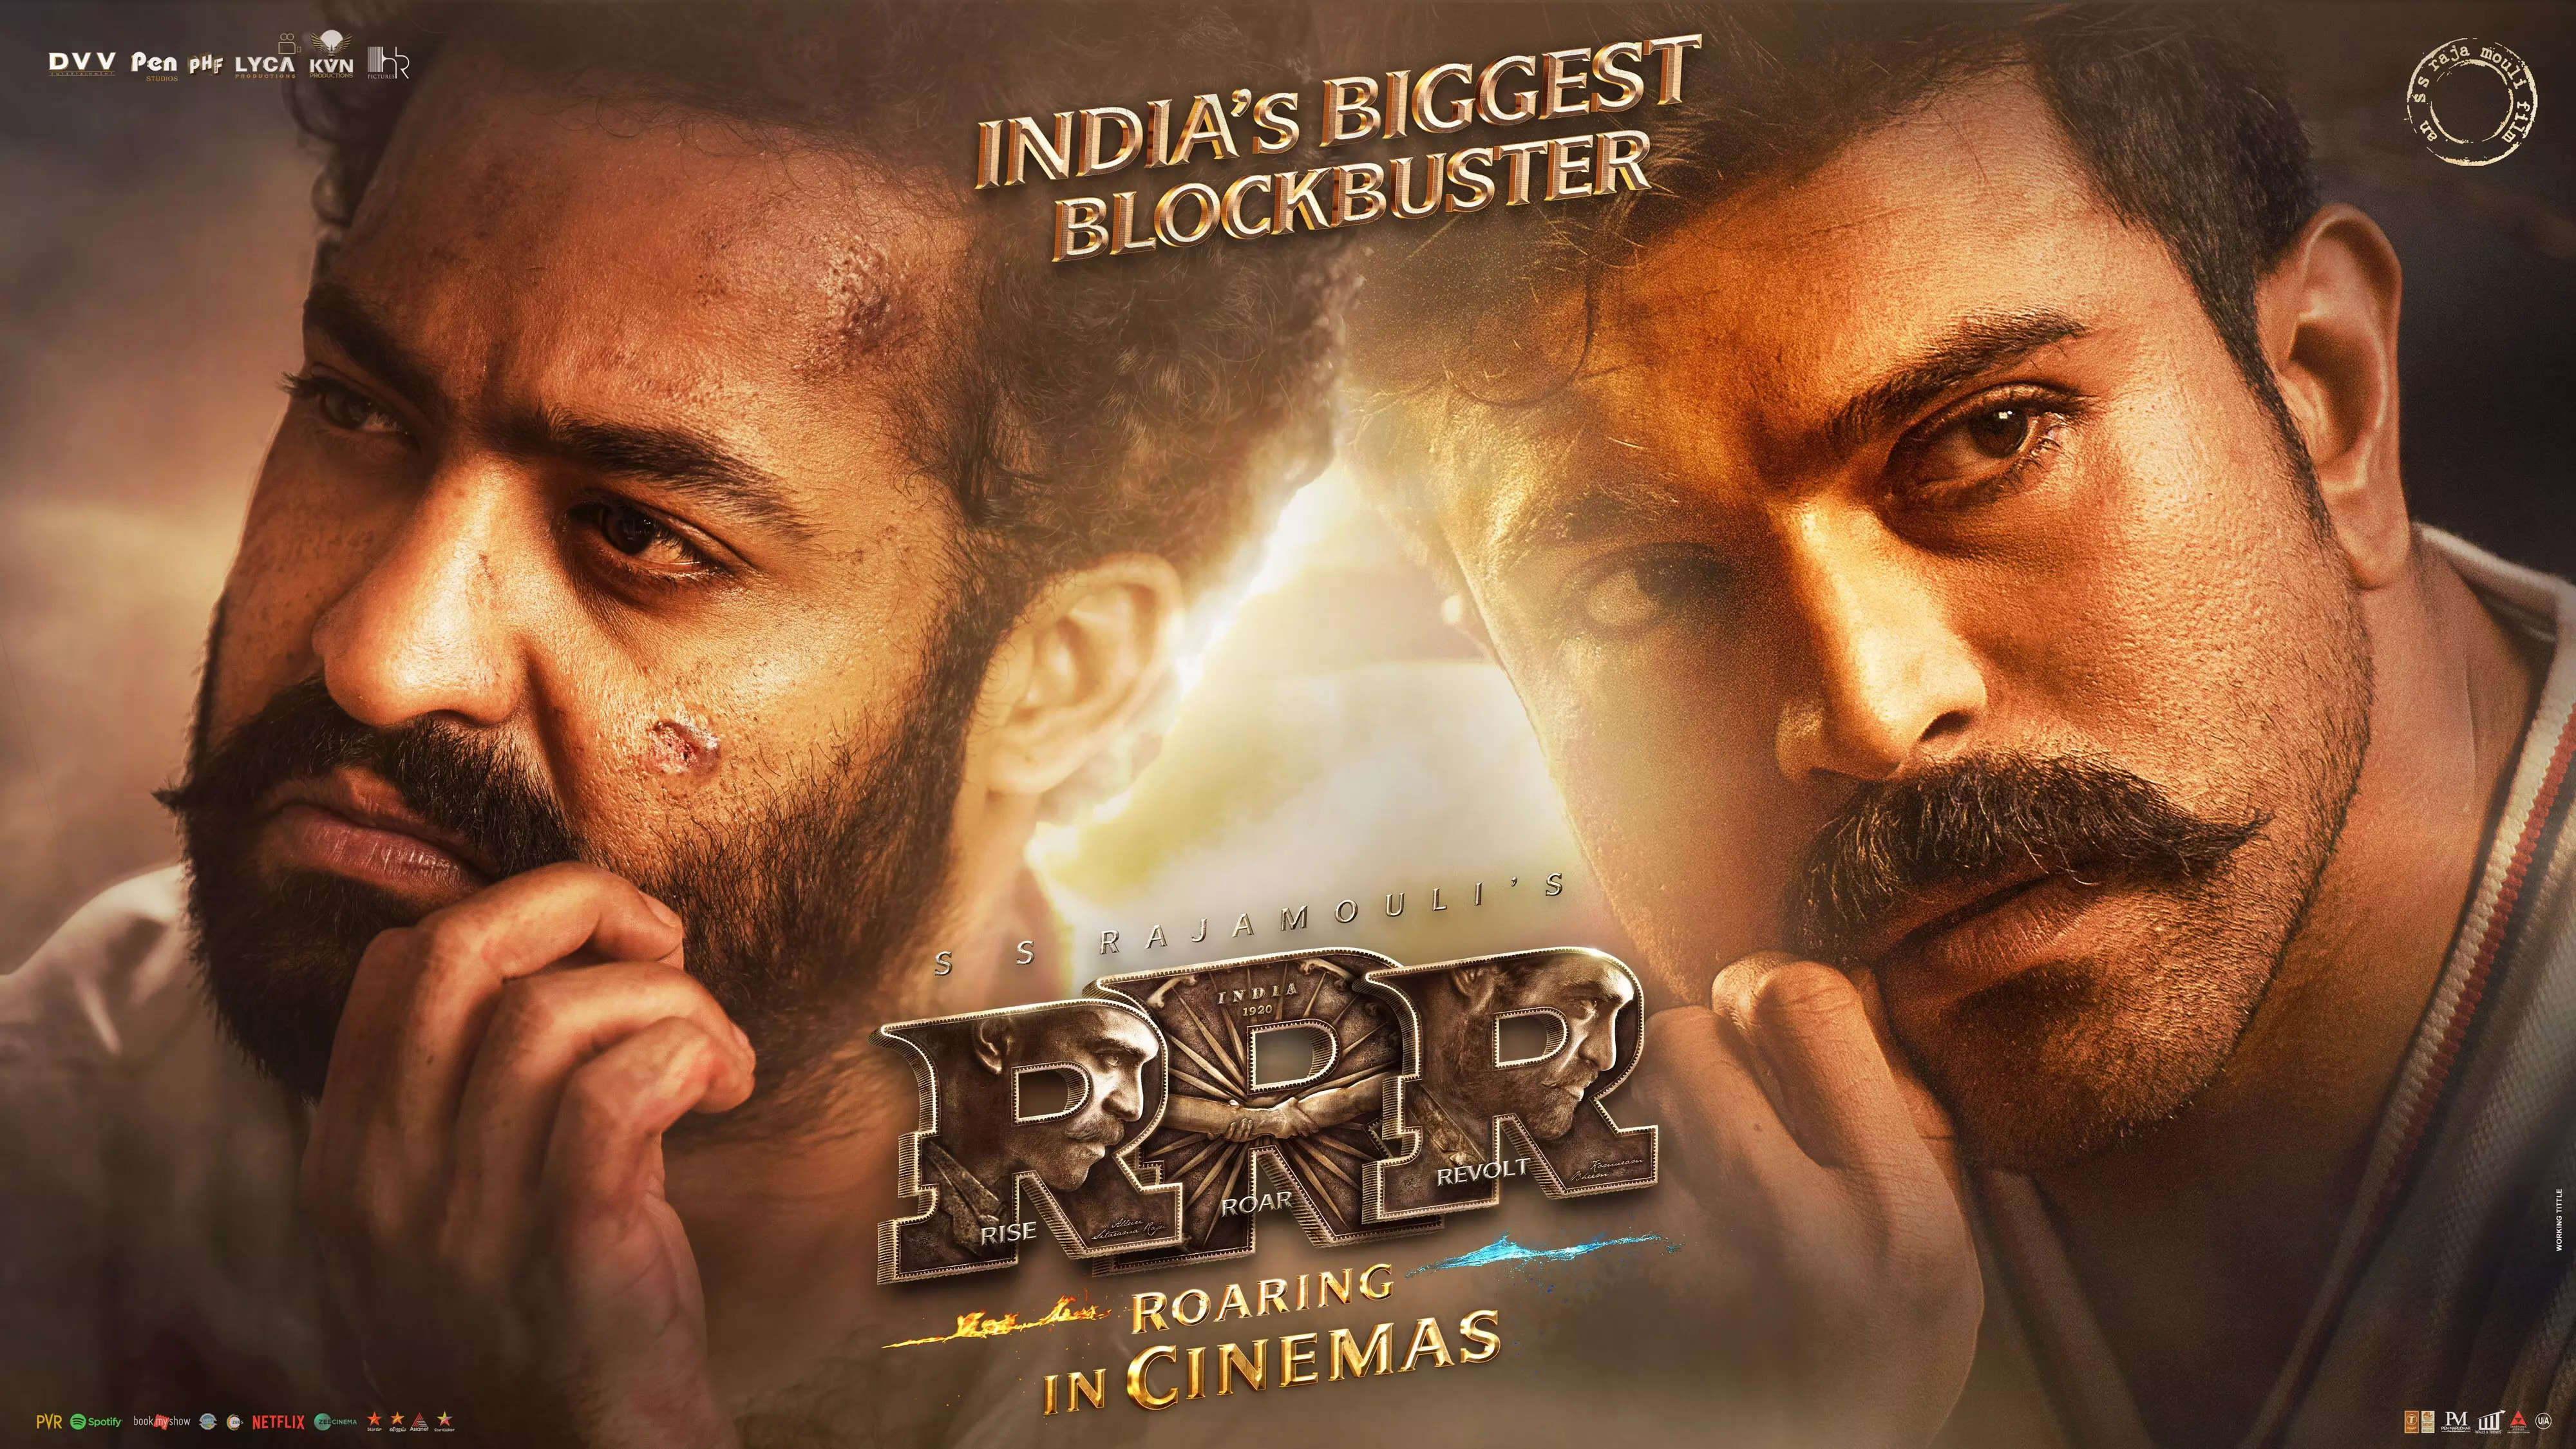 RRR' box office collection day 5: SS Rajamouli film continues to roar; collects Rs 40 crores on a busy Tuesday | Telugu Movie News - Times of India